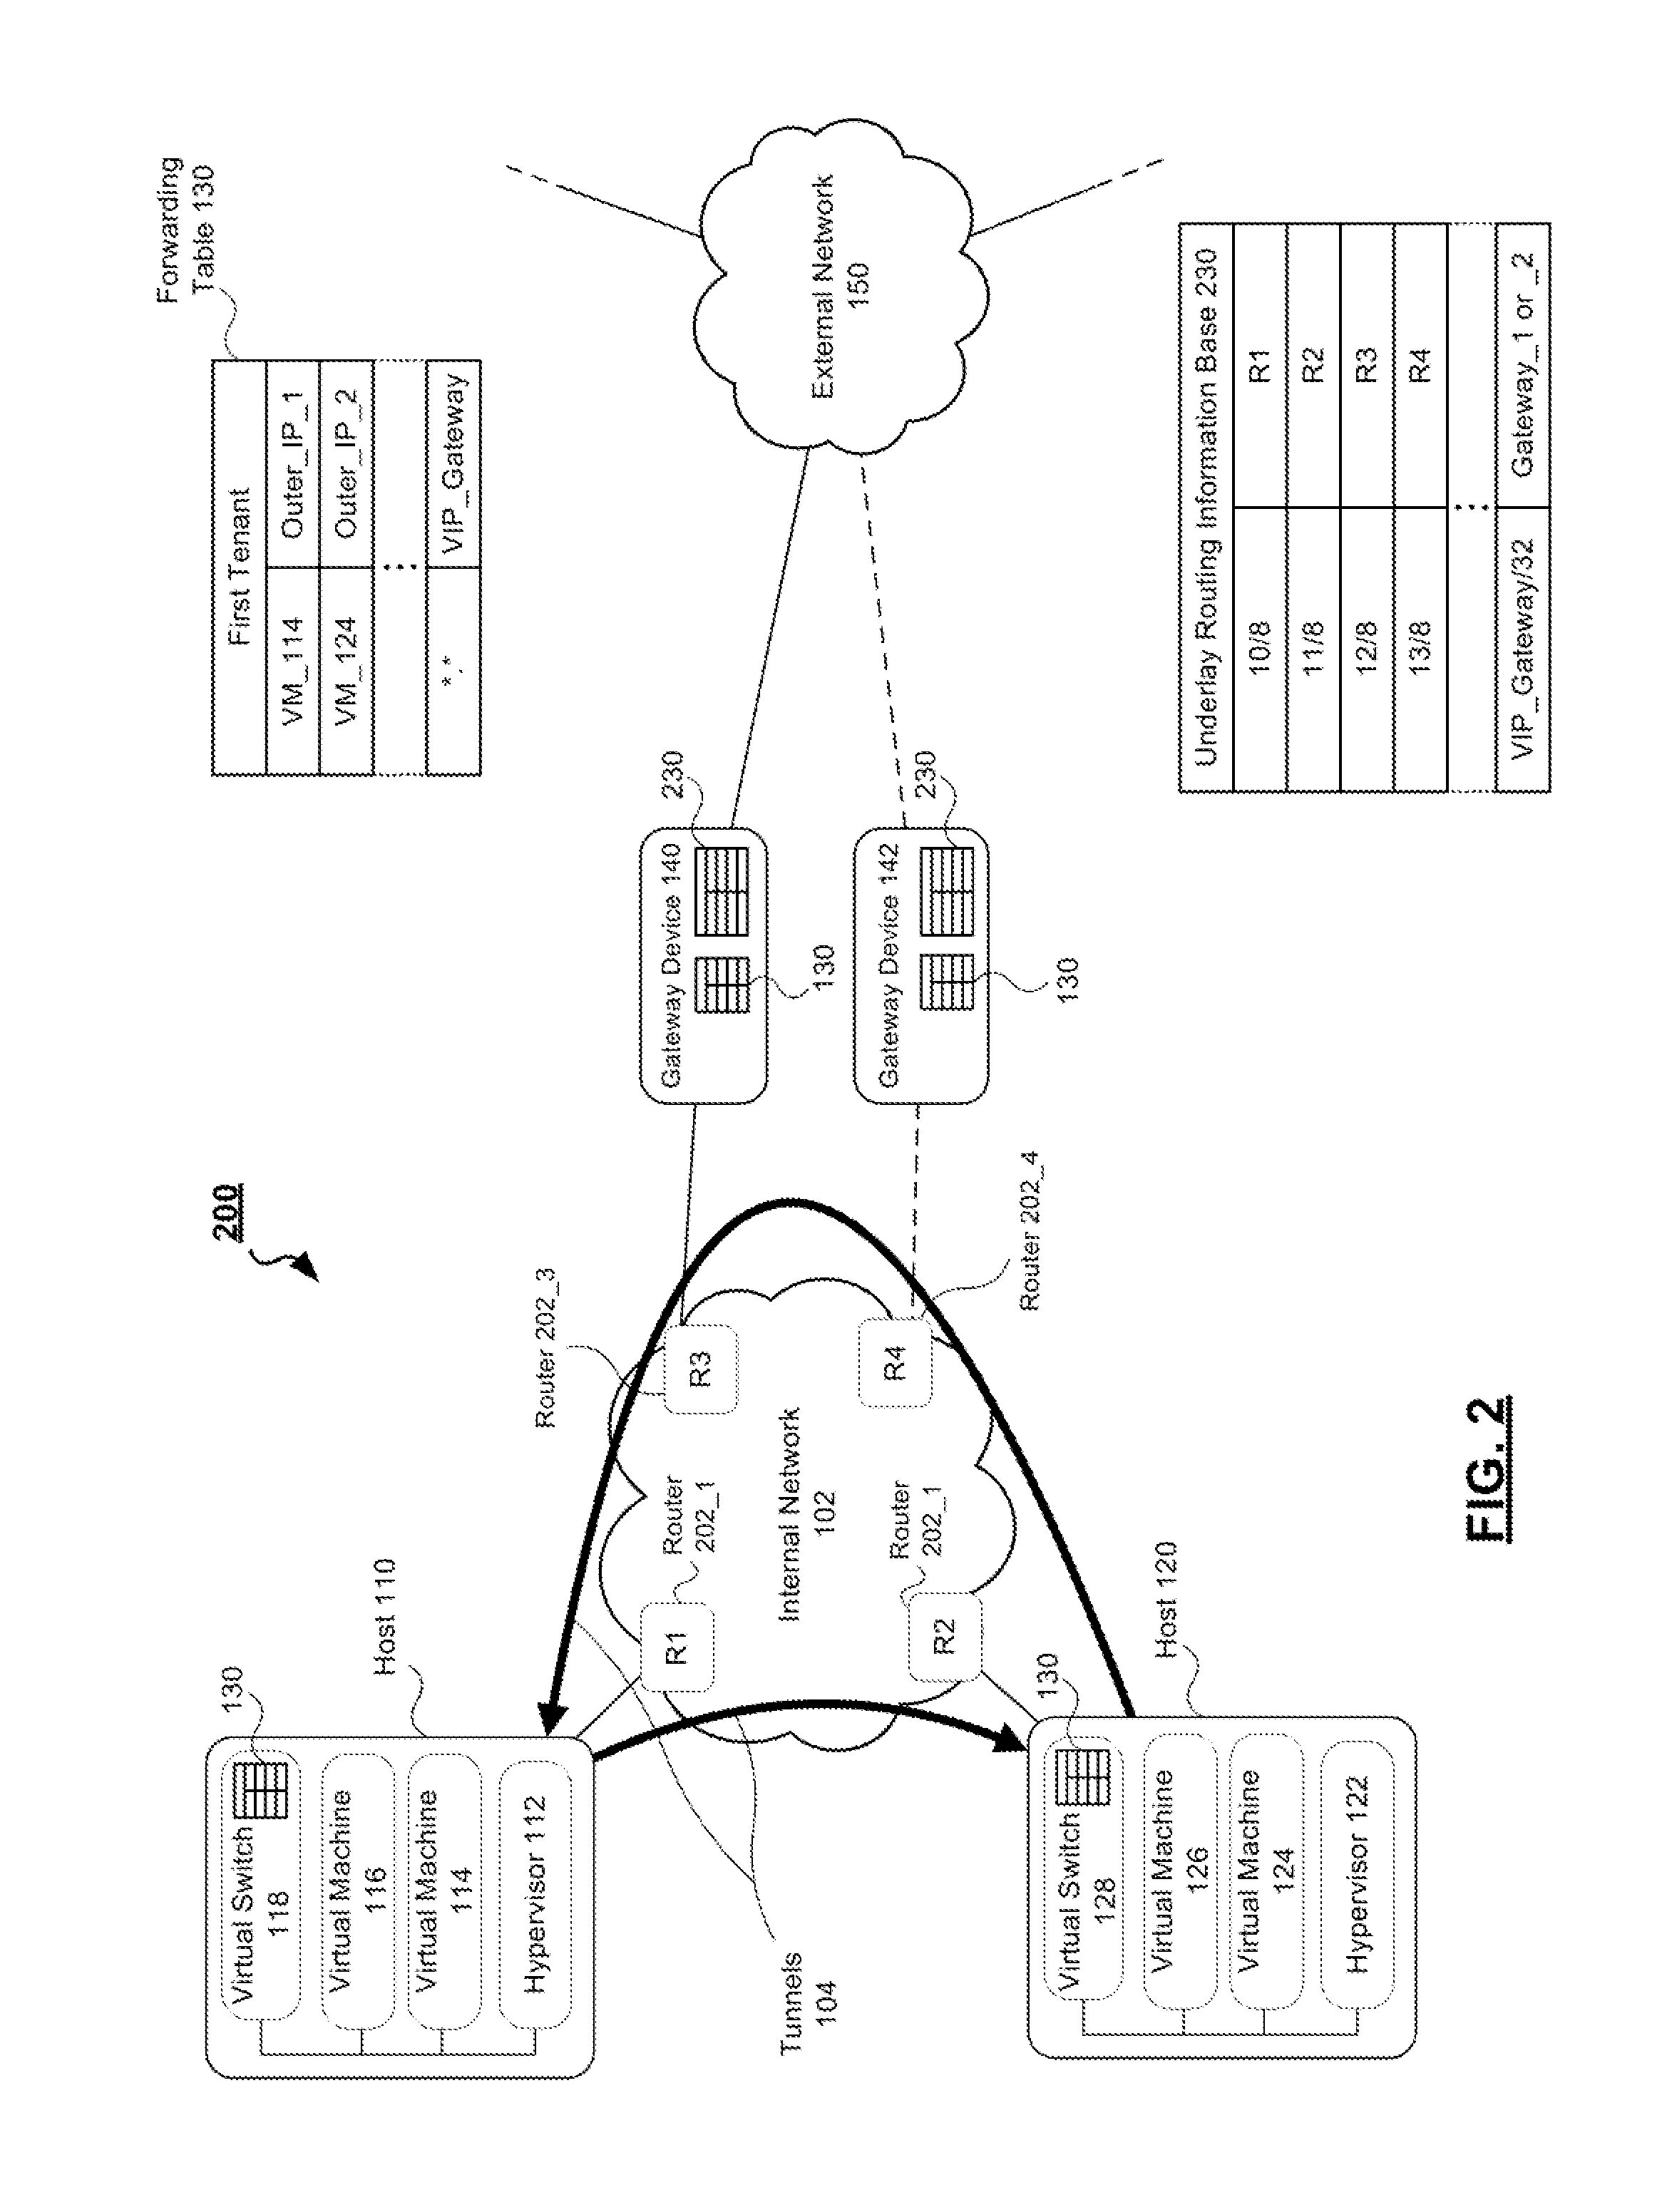 Systems and methods for providing vlan-independent gateways in a network virtualization overlay implementation